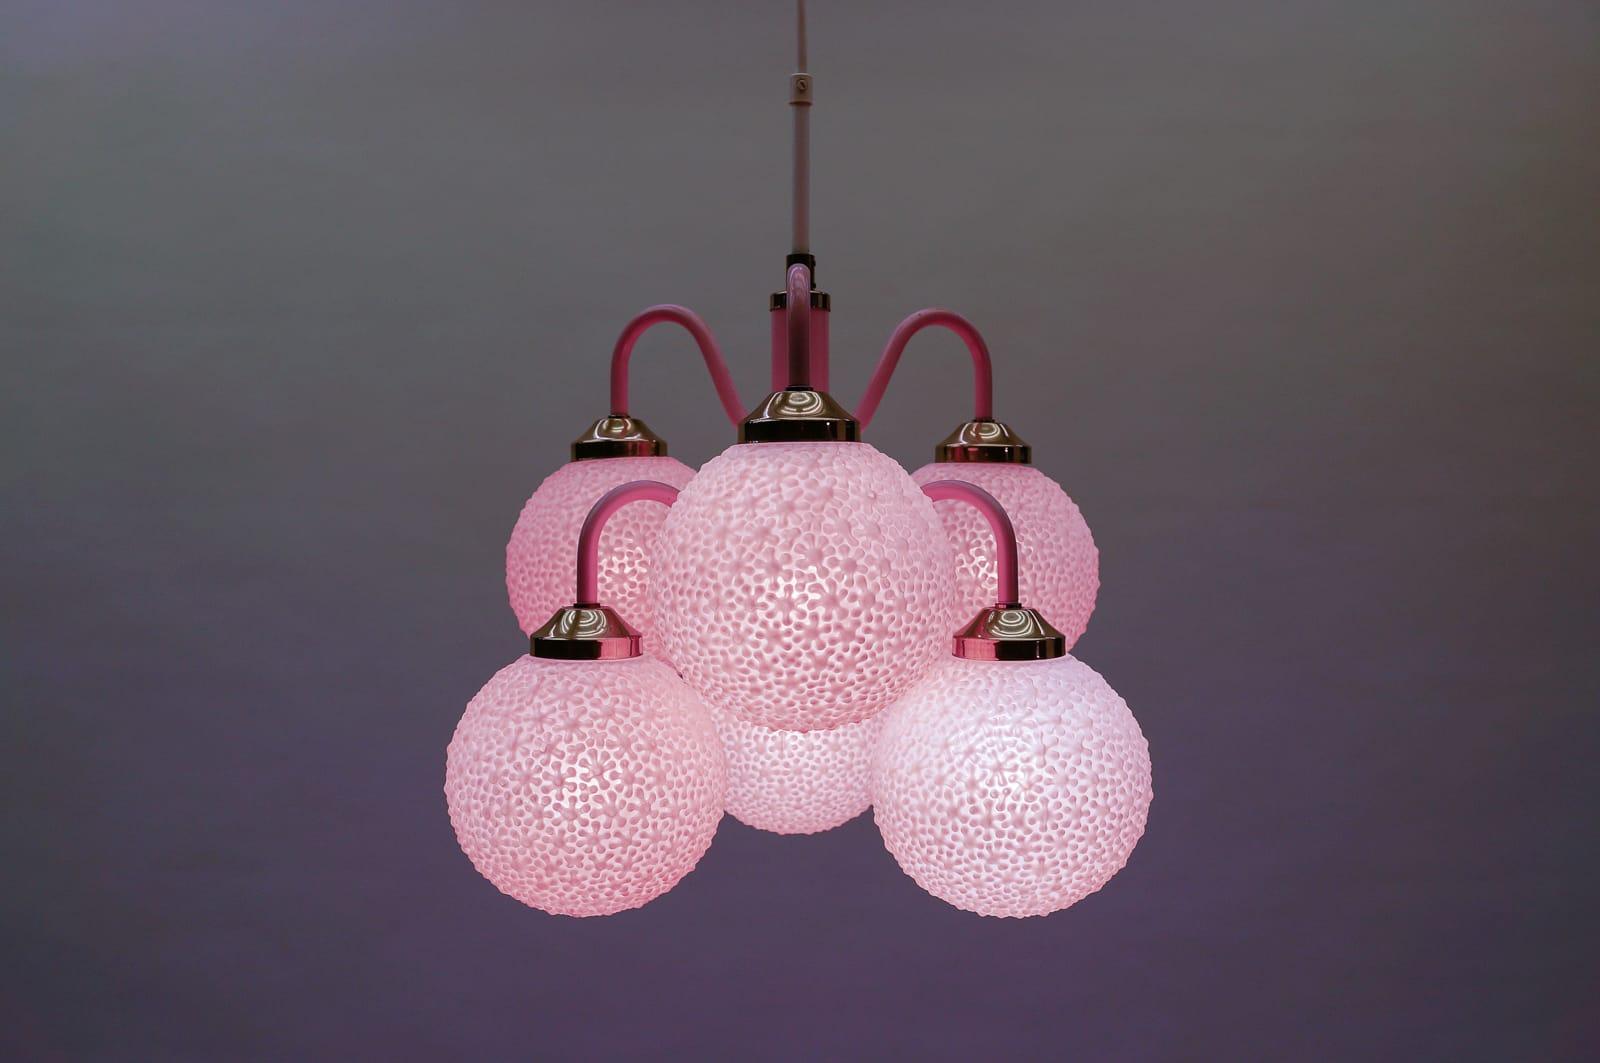 All in pink, a very rare lamp in the colour version. A real eye-catcher. 

The Lampoe is made of lacquered metal and pink glass ball shades.

Fully functional.

Six E14 sockets. Works with 220V and 110V.

Wiring is suitable for all countries.